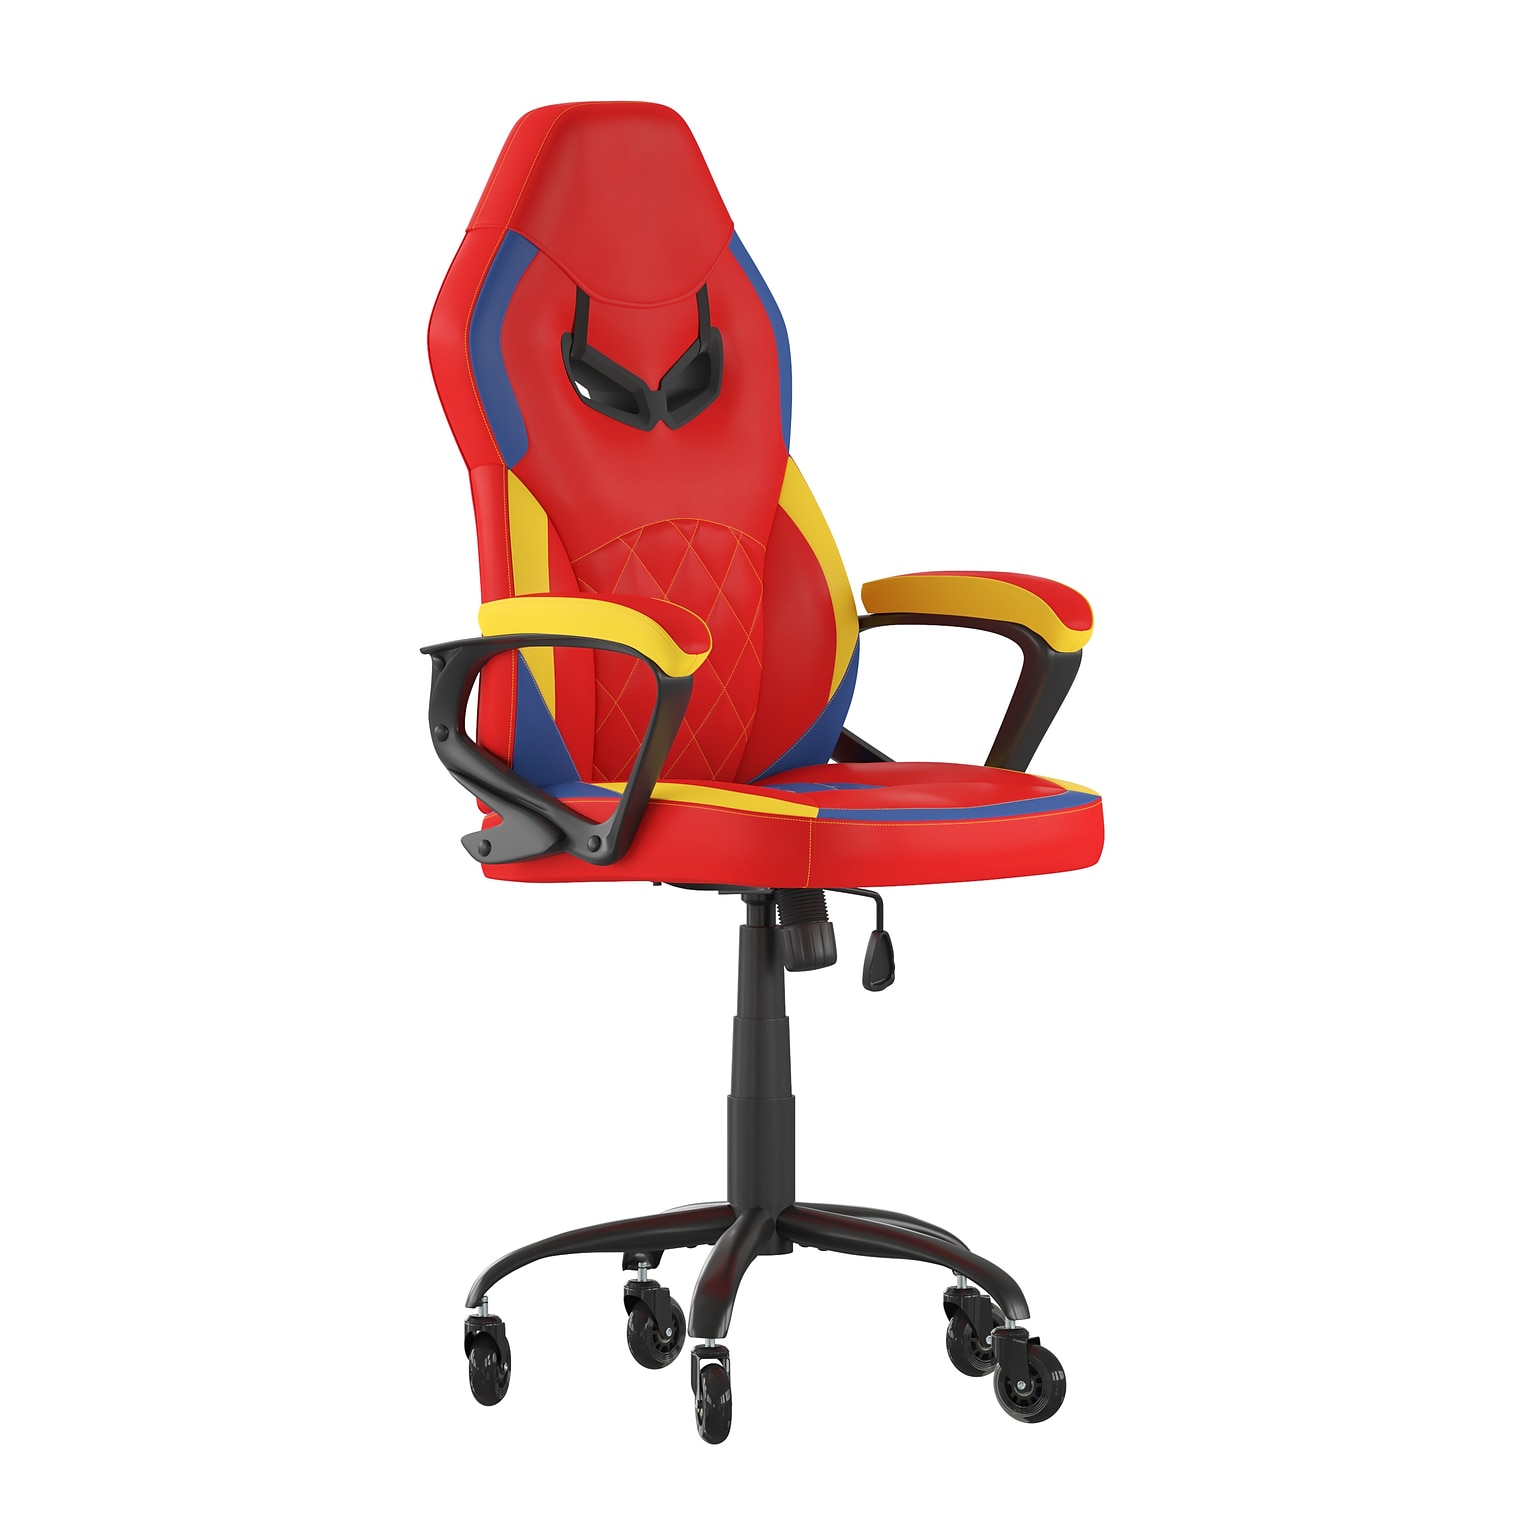 Flash Furniture Stone Ergonomic LeatherSoft Swivel Office Gaming Chair with Transparent Wheels, Red/Blue/Yellow (ULA074RDRLB)